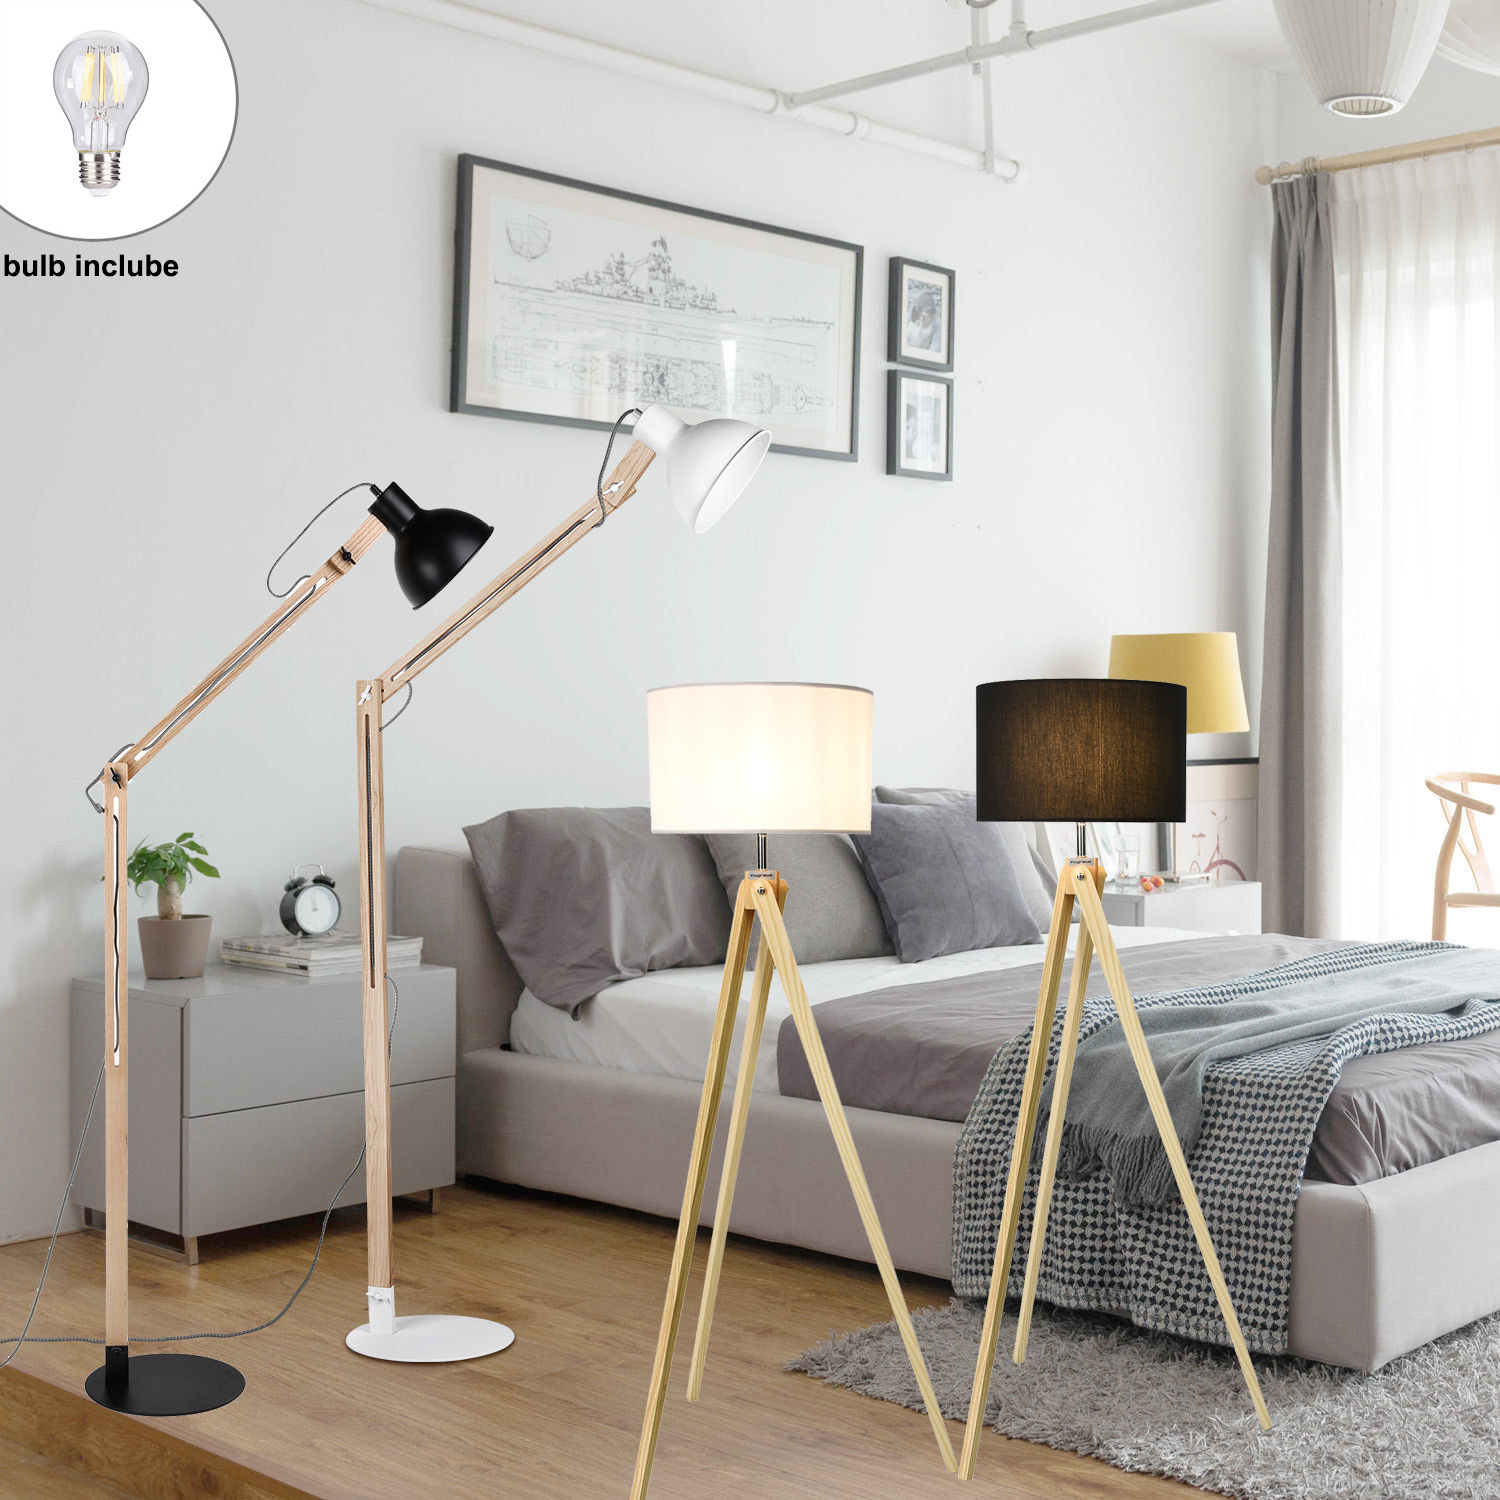 Details About Modern Floor Lamp Creative Wood Folding Sofa Bad Living Room Folding Lighting Us pertaining to size 1500 X 1500